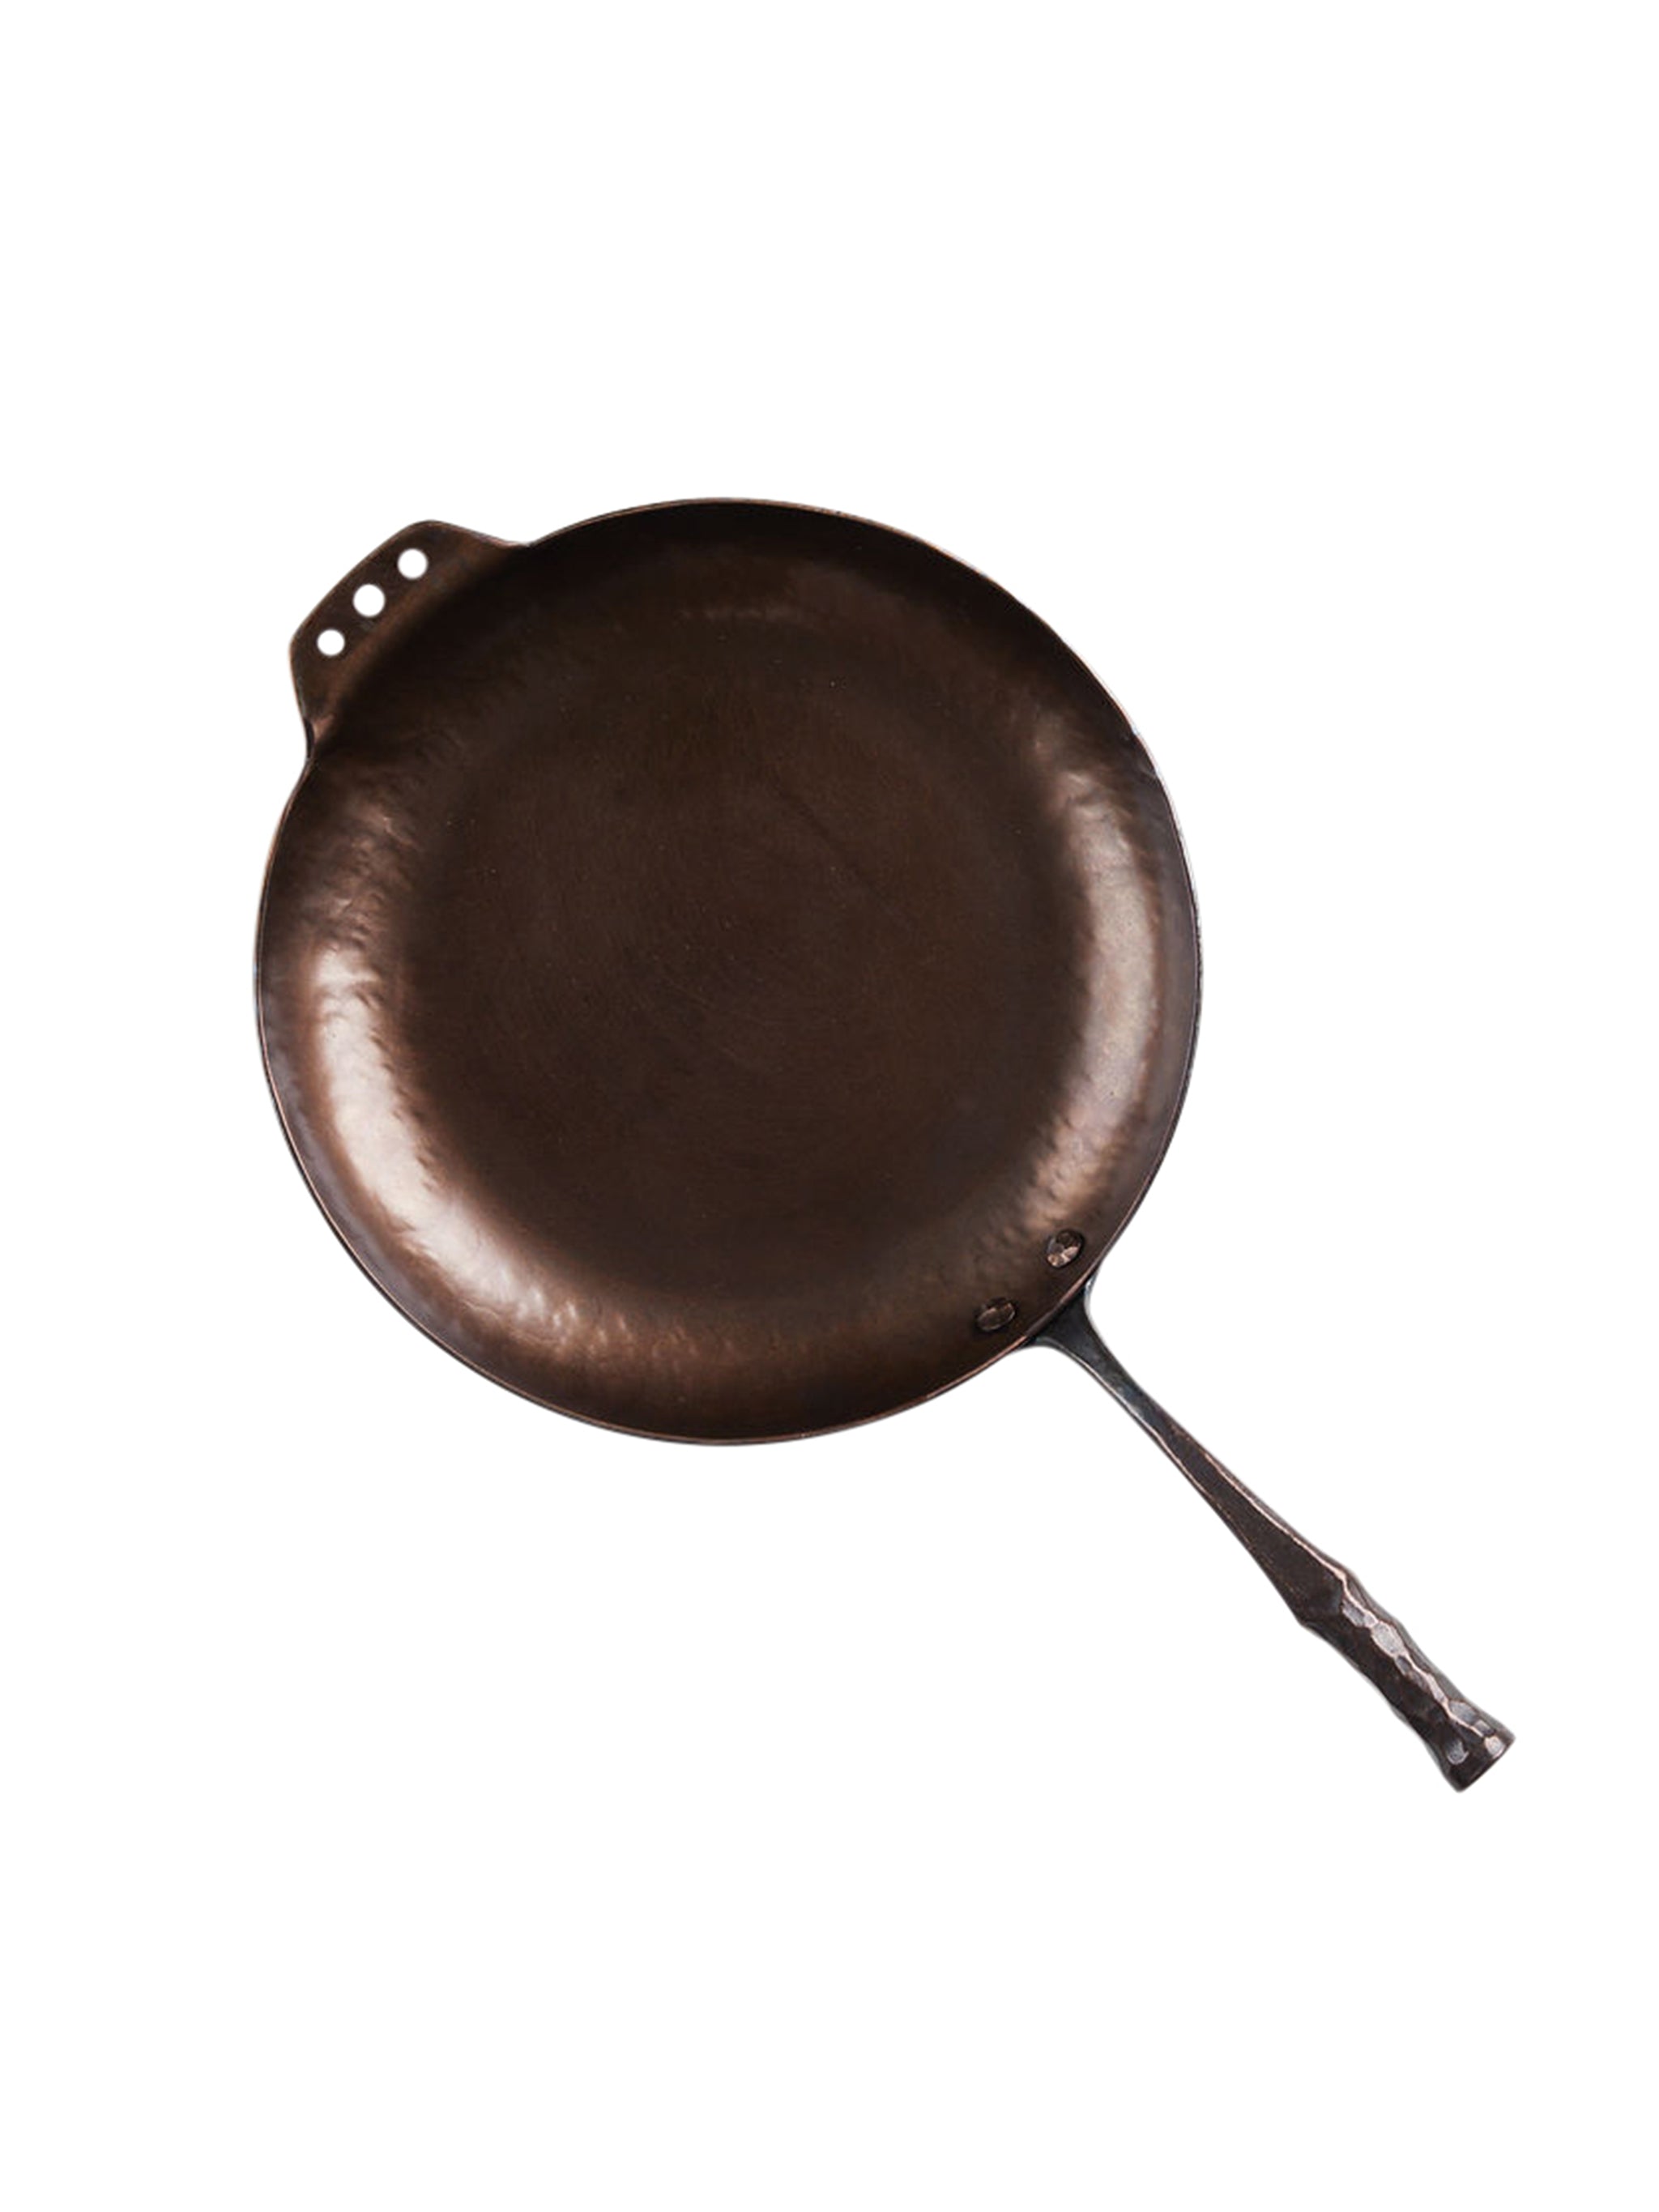 Smithey Farmhouse Skillet, Hand-Forged Carbon Steel, 12 Frying Pan on  Food52